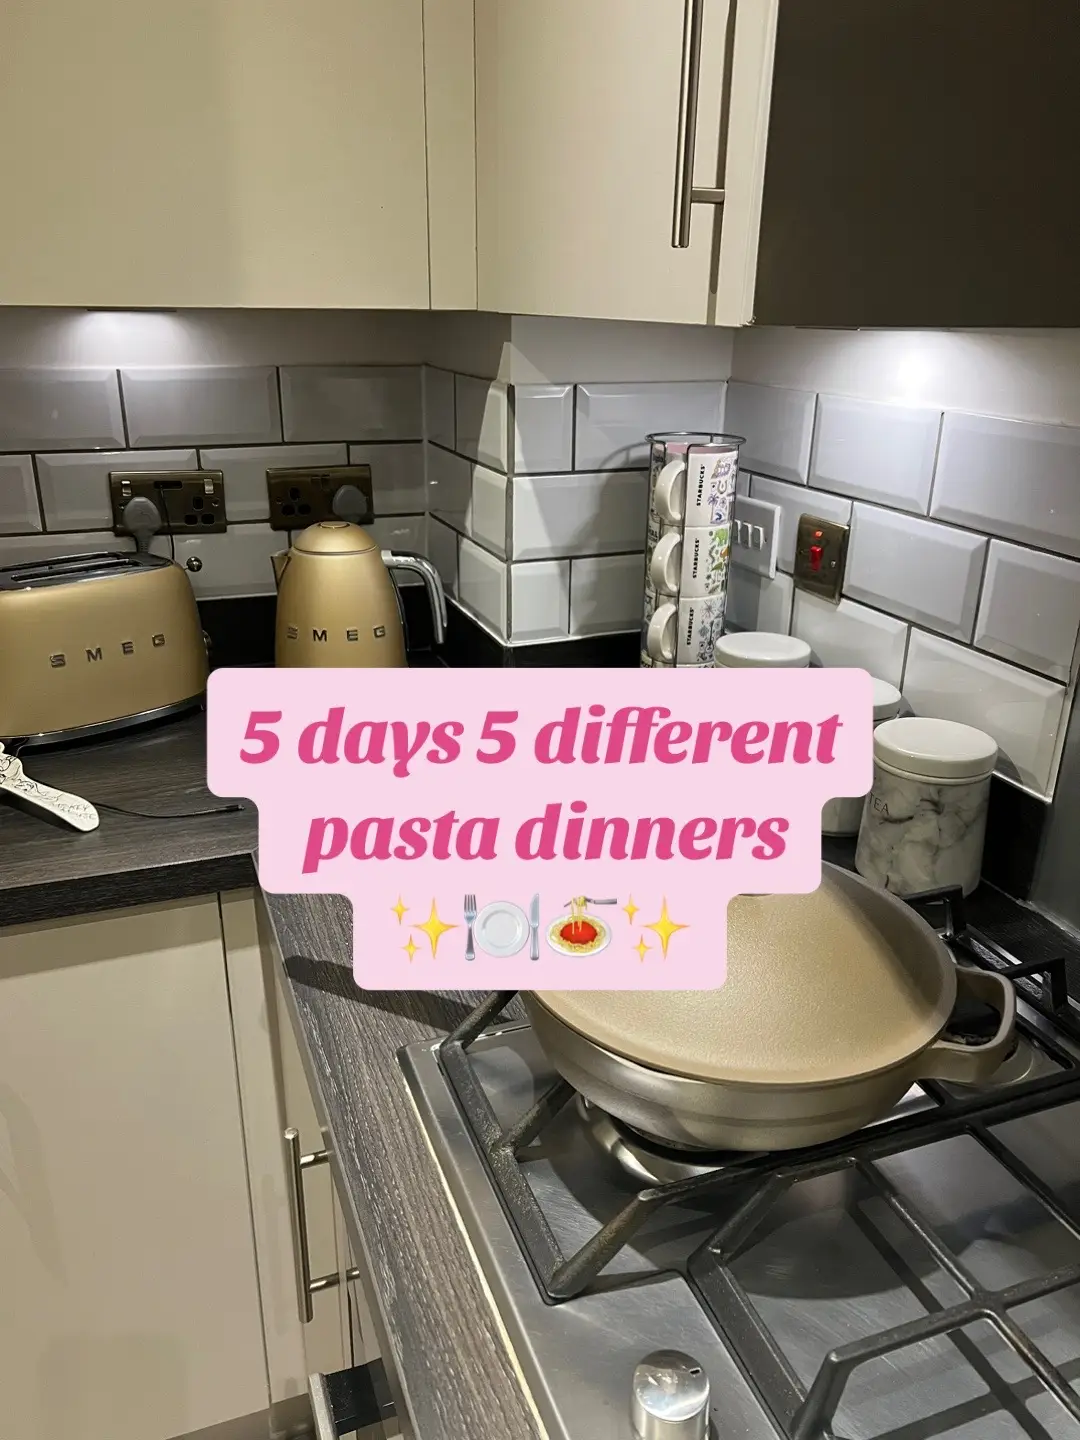 because who doesnt love a pasta dinner? All recipes have been posted on TikTok & my recipe platform  There are over 400 guides with recipe cards, meal plans & shopping lists all available for you to choose from! Use code TIKTOK20 for 20% off your first two months and you can sign up on the link in my bio  #spicybeefpasta #chorizopasta #nandospasta #nandos #pastadinner #pastatiktok #pastarecipe #prawnlinguinepasta #rastapasta #steakpasta #EasyRecipe 